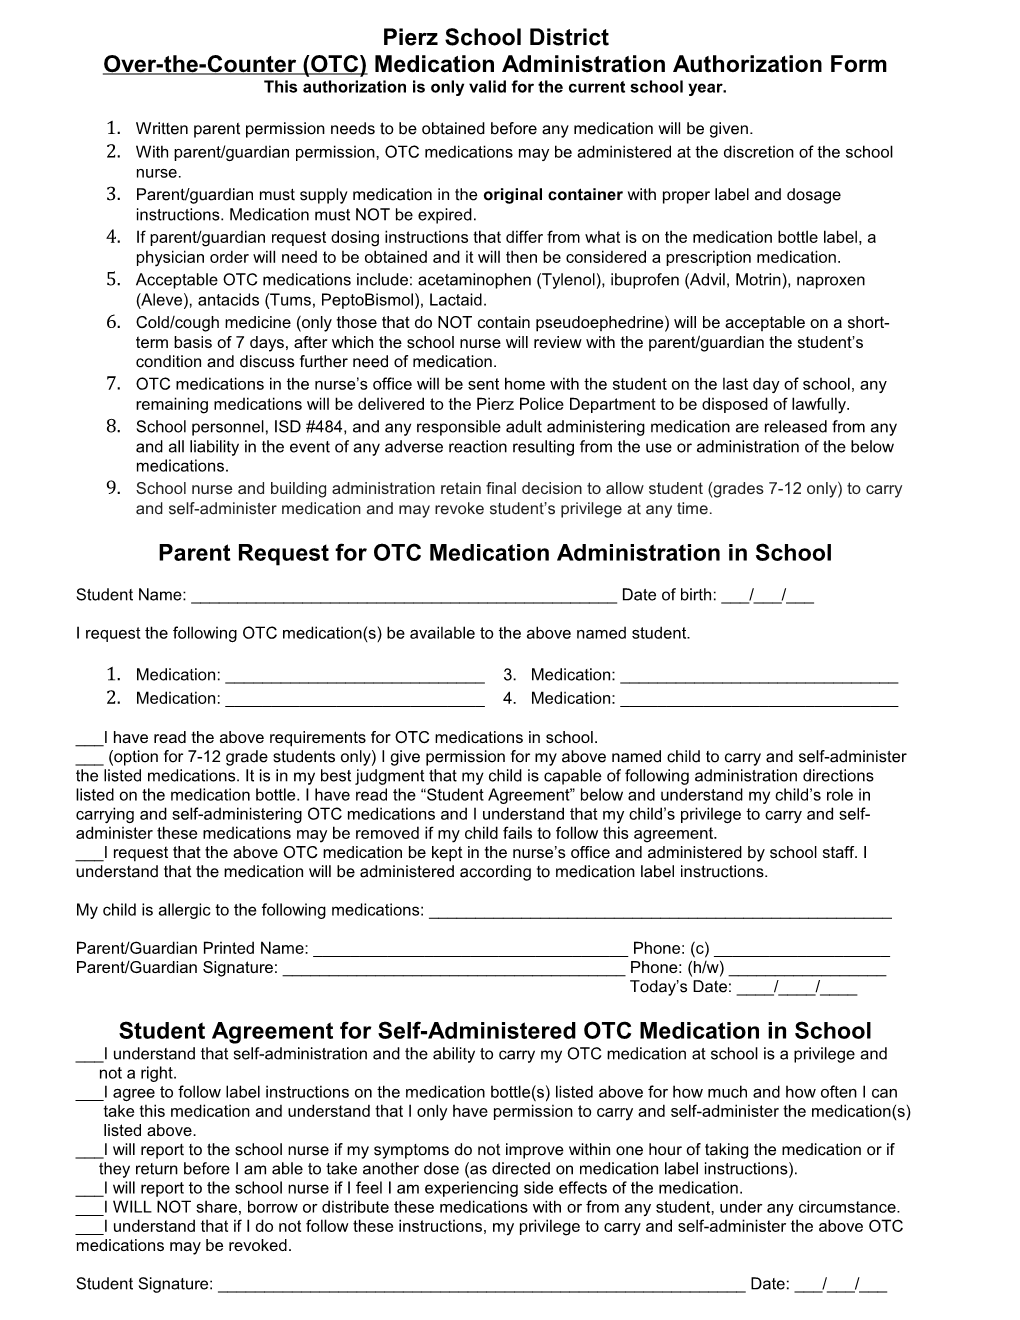 Over-The-Counter (OTC) Medication Administration Authorization Form